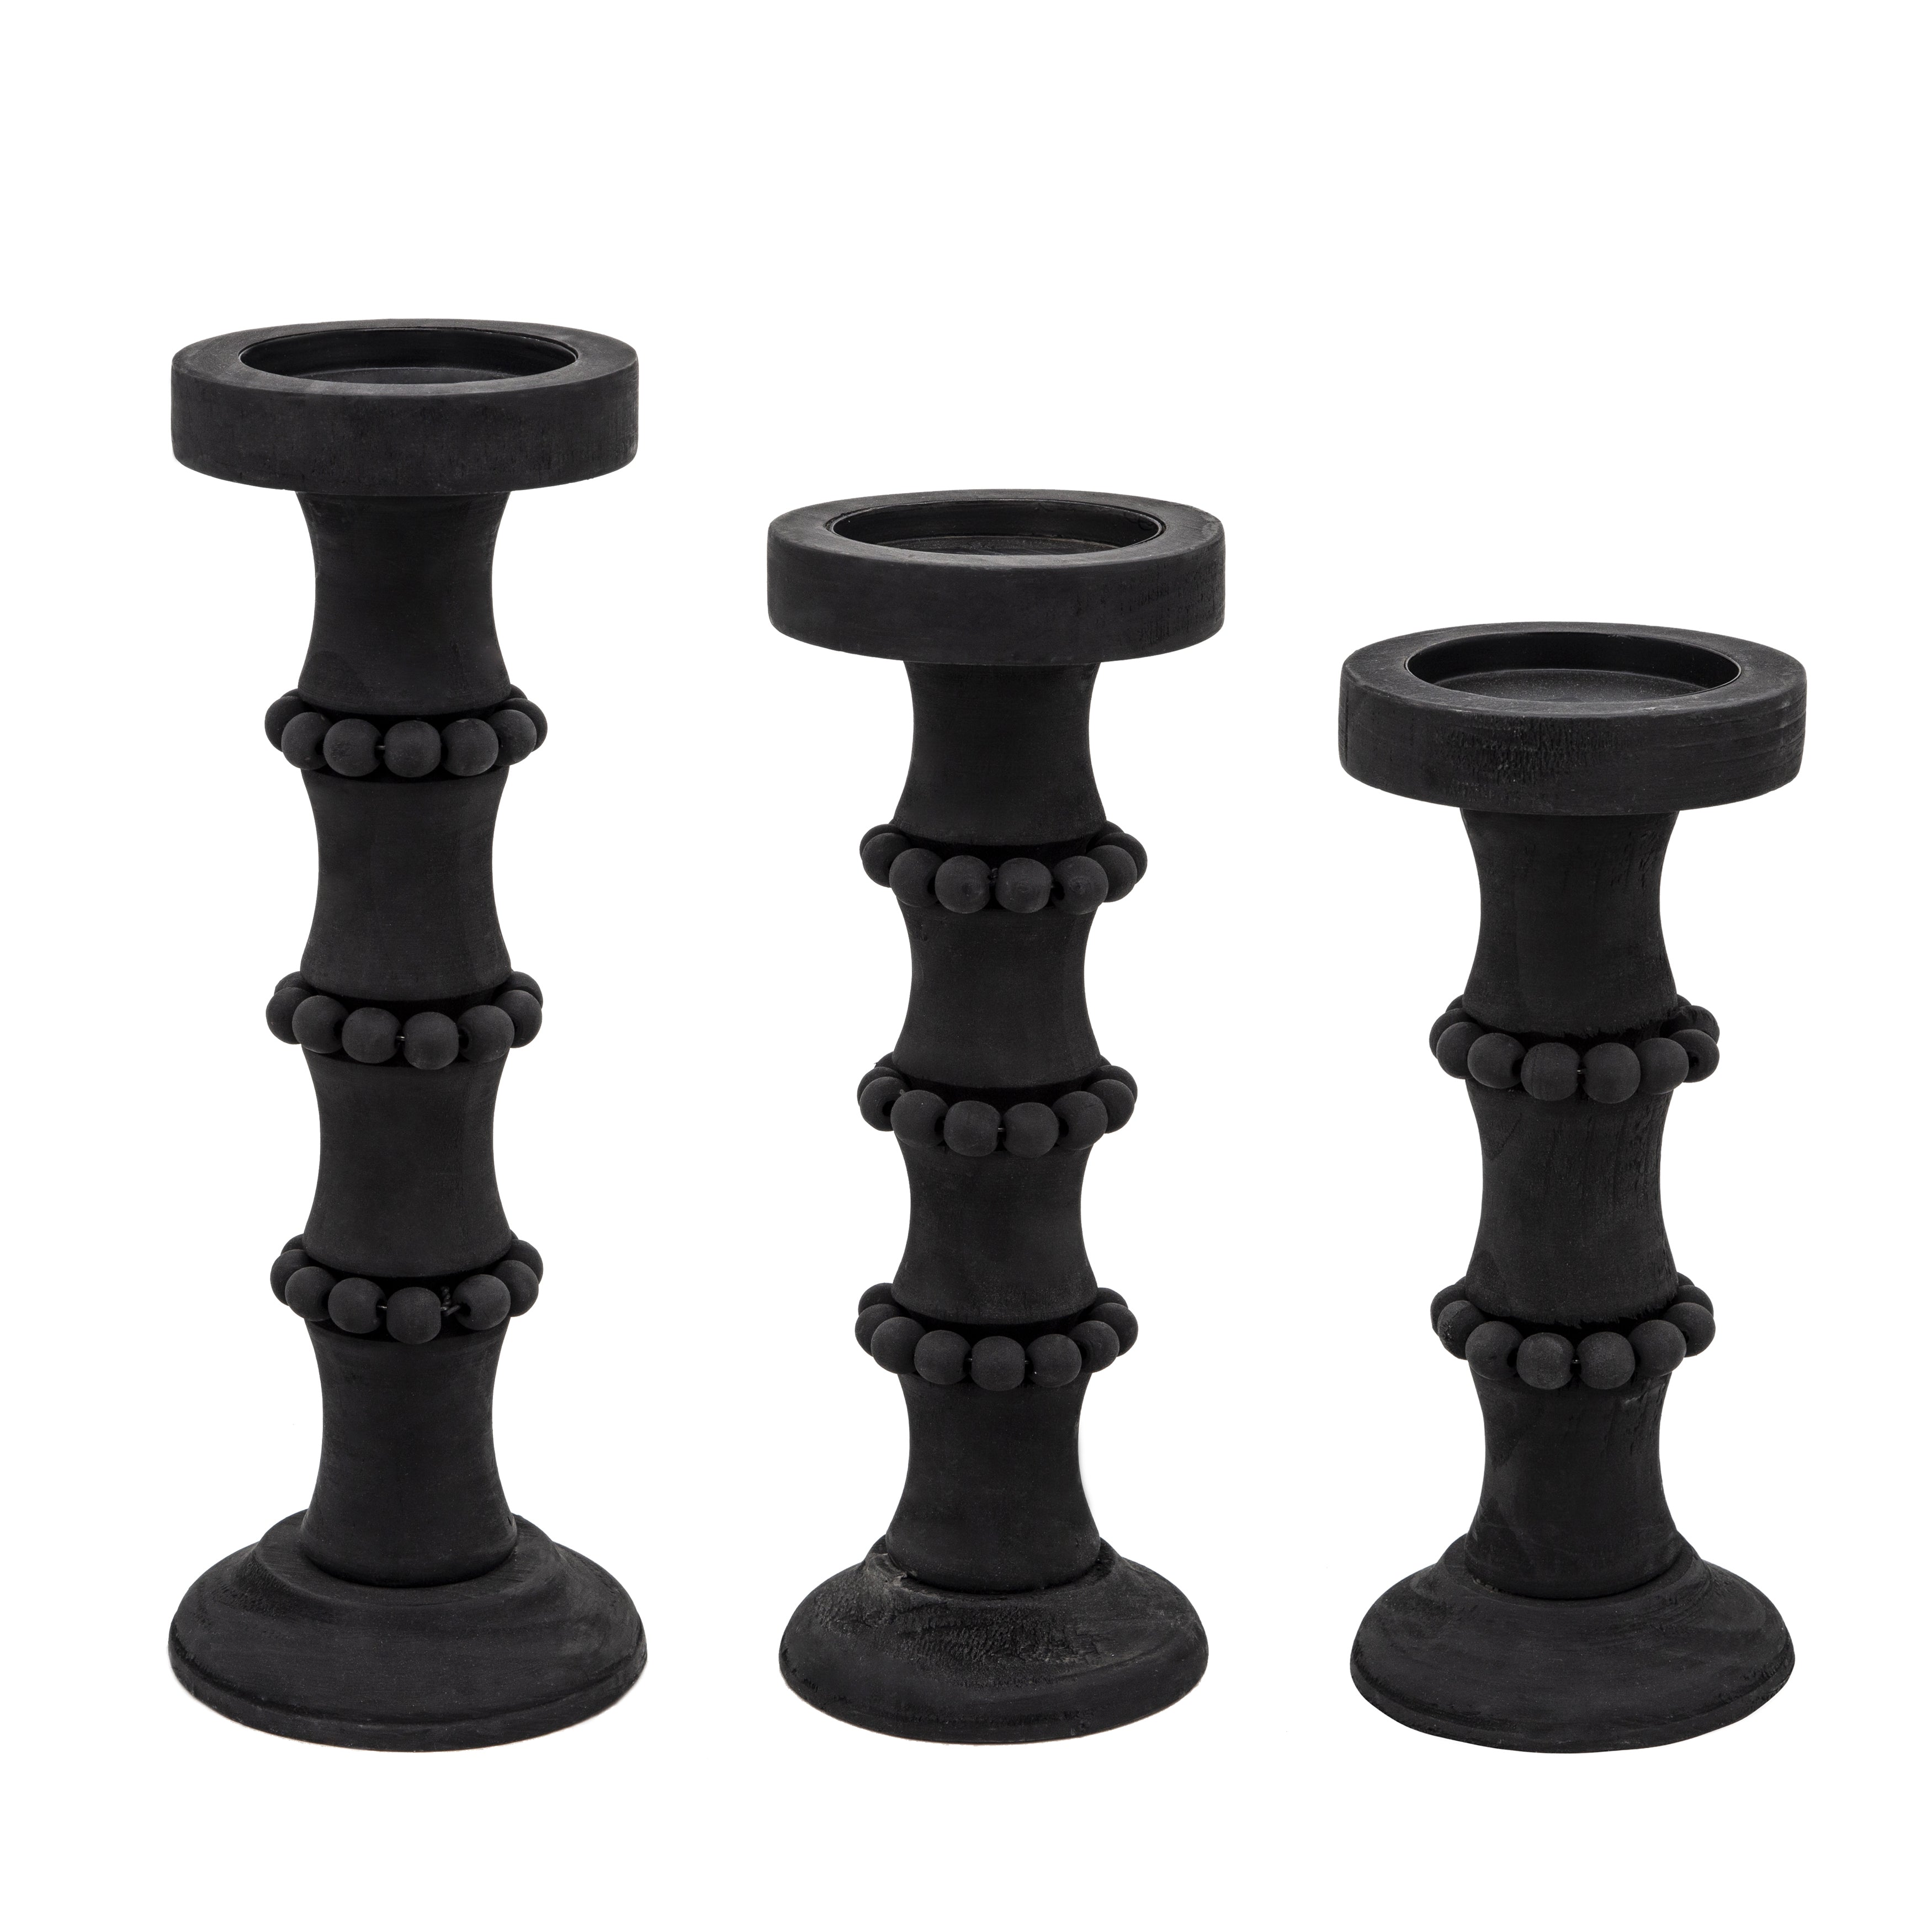 Wood, 13" Antique Style Candle Holder, Black, Candle Holders and Tealights